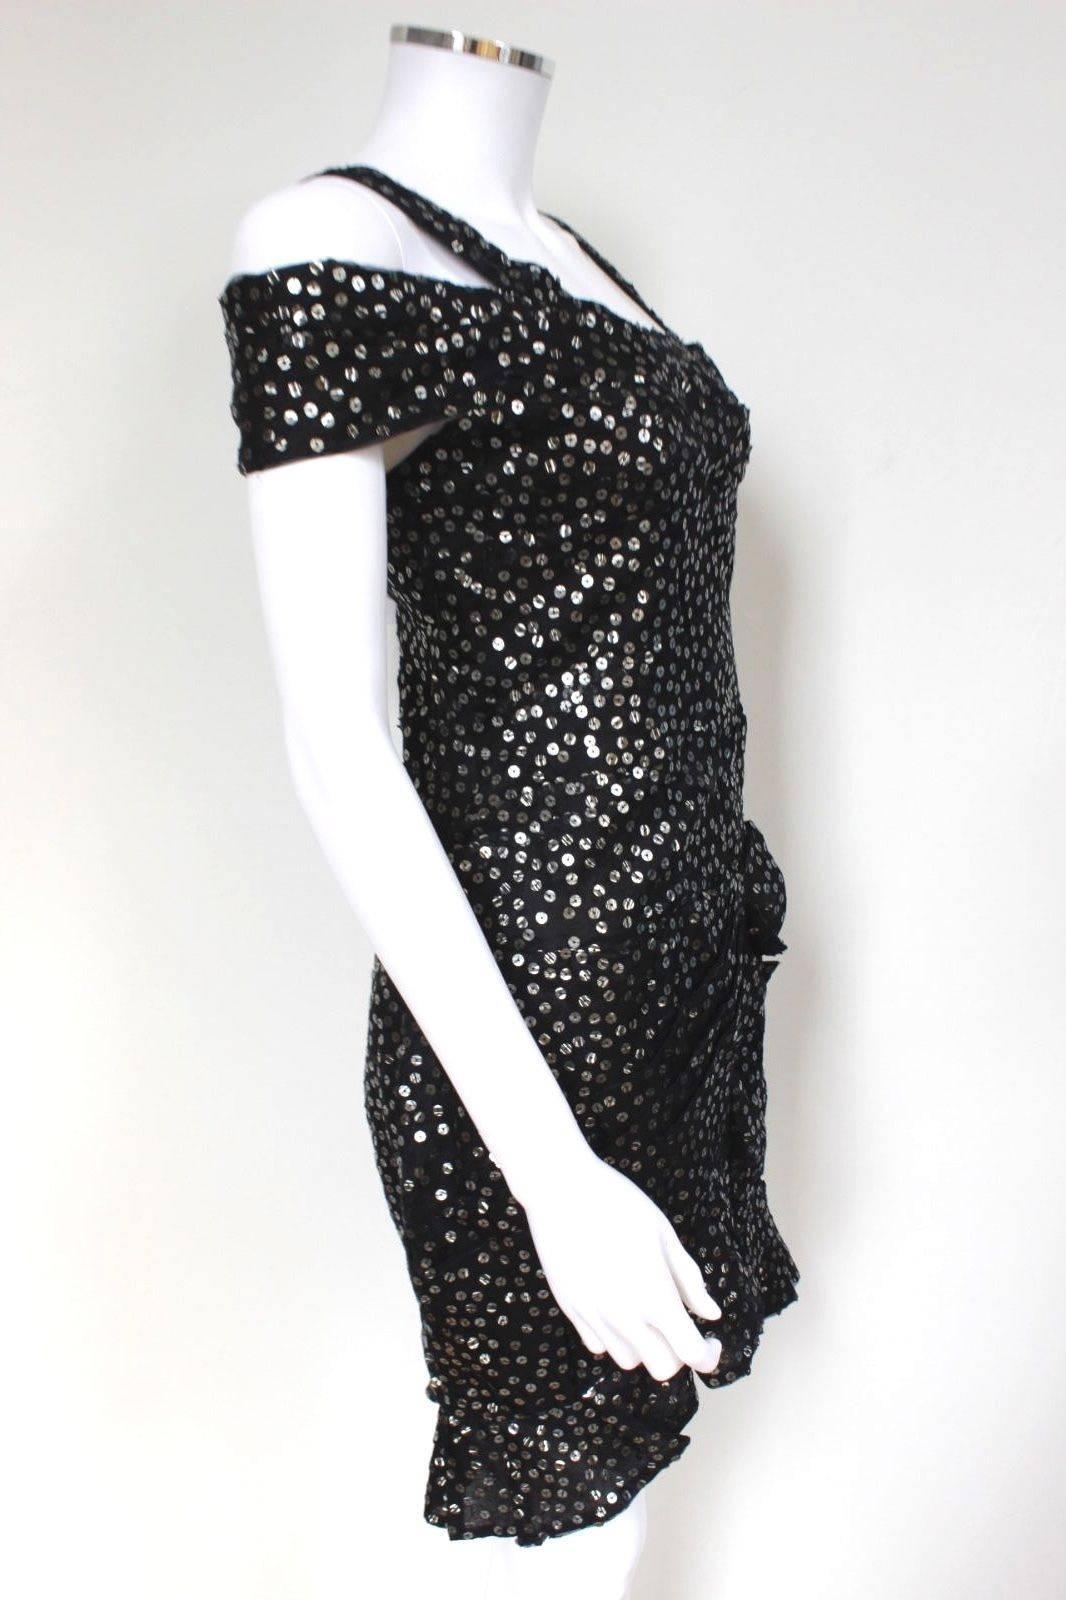 New ISABEL MARANT Black Silk Sequins Becky Dress Size 36 uk 8 
This flirty Isabel Marant Becky dress is an eye-catching addition to any wardrobe. 
Featuring a fabulous sheer silk in black covered in silver sequins, this dress has subtle pleated and